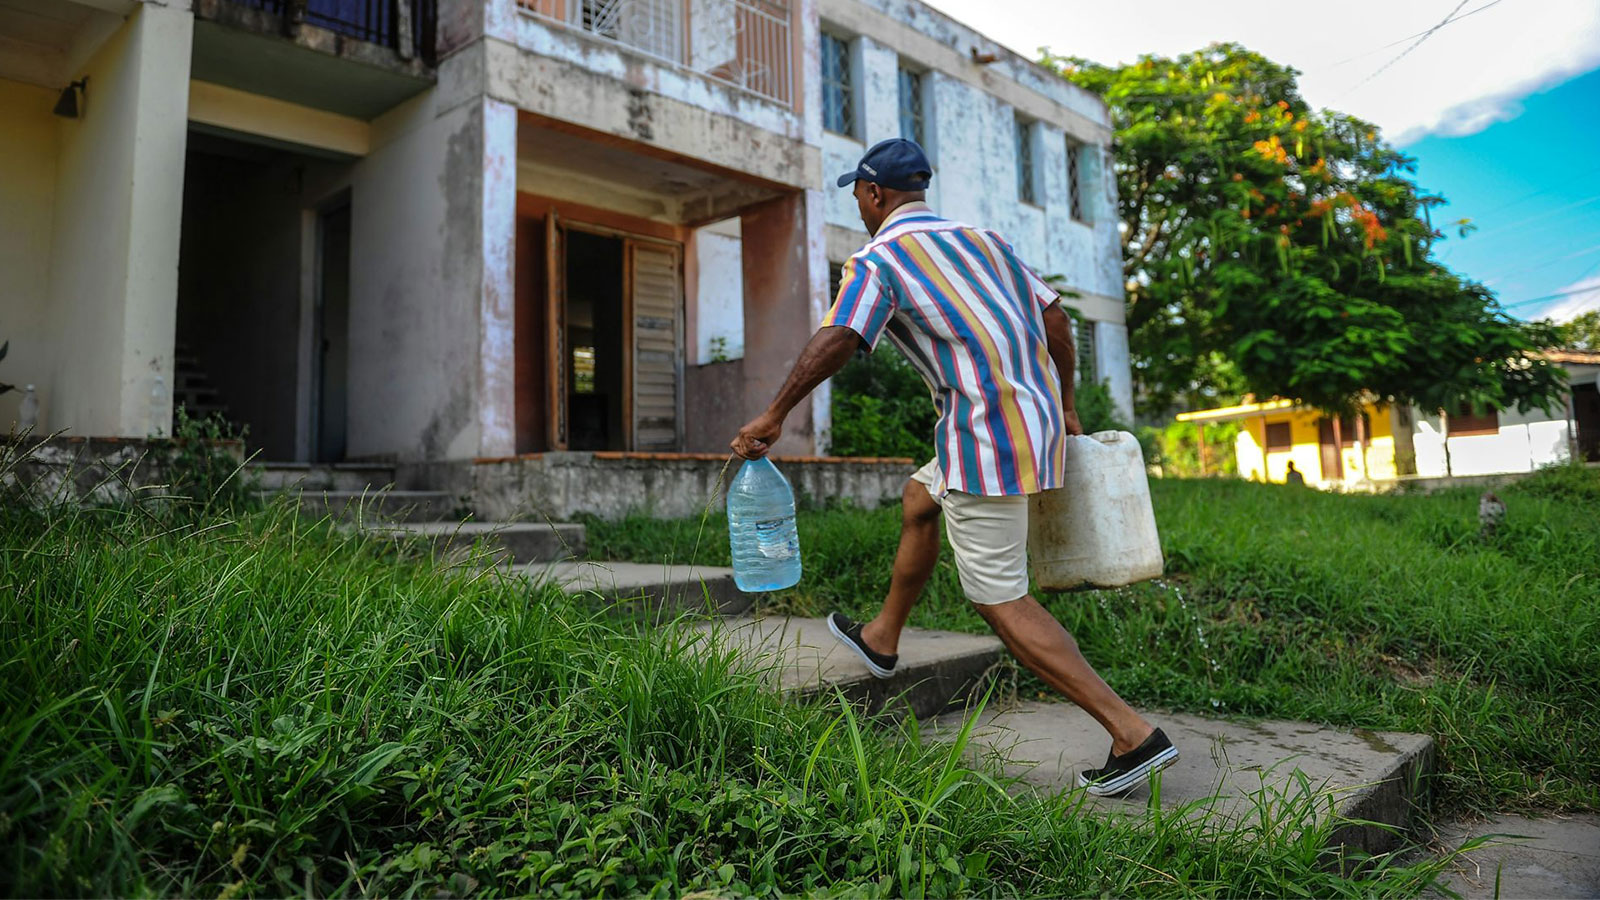 Thirsty in paradise: Water crises are a growing problem across the Caribbean islands